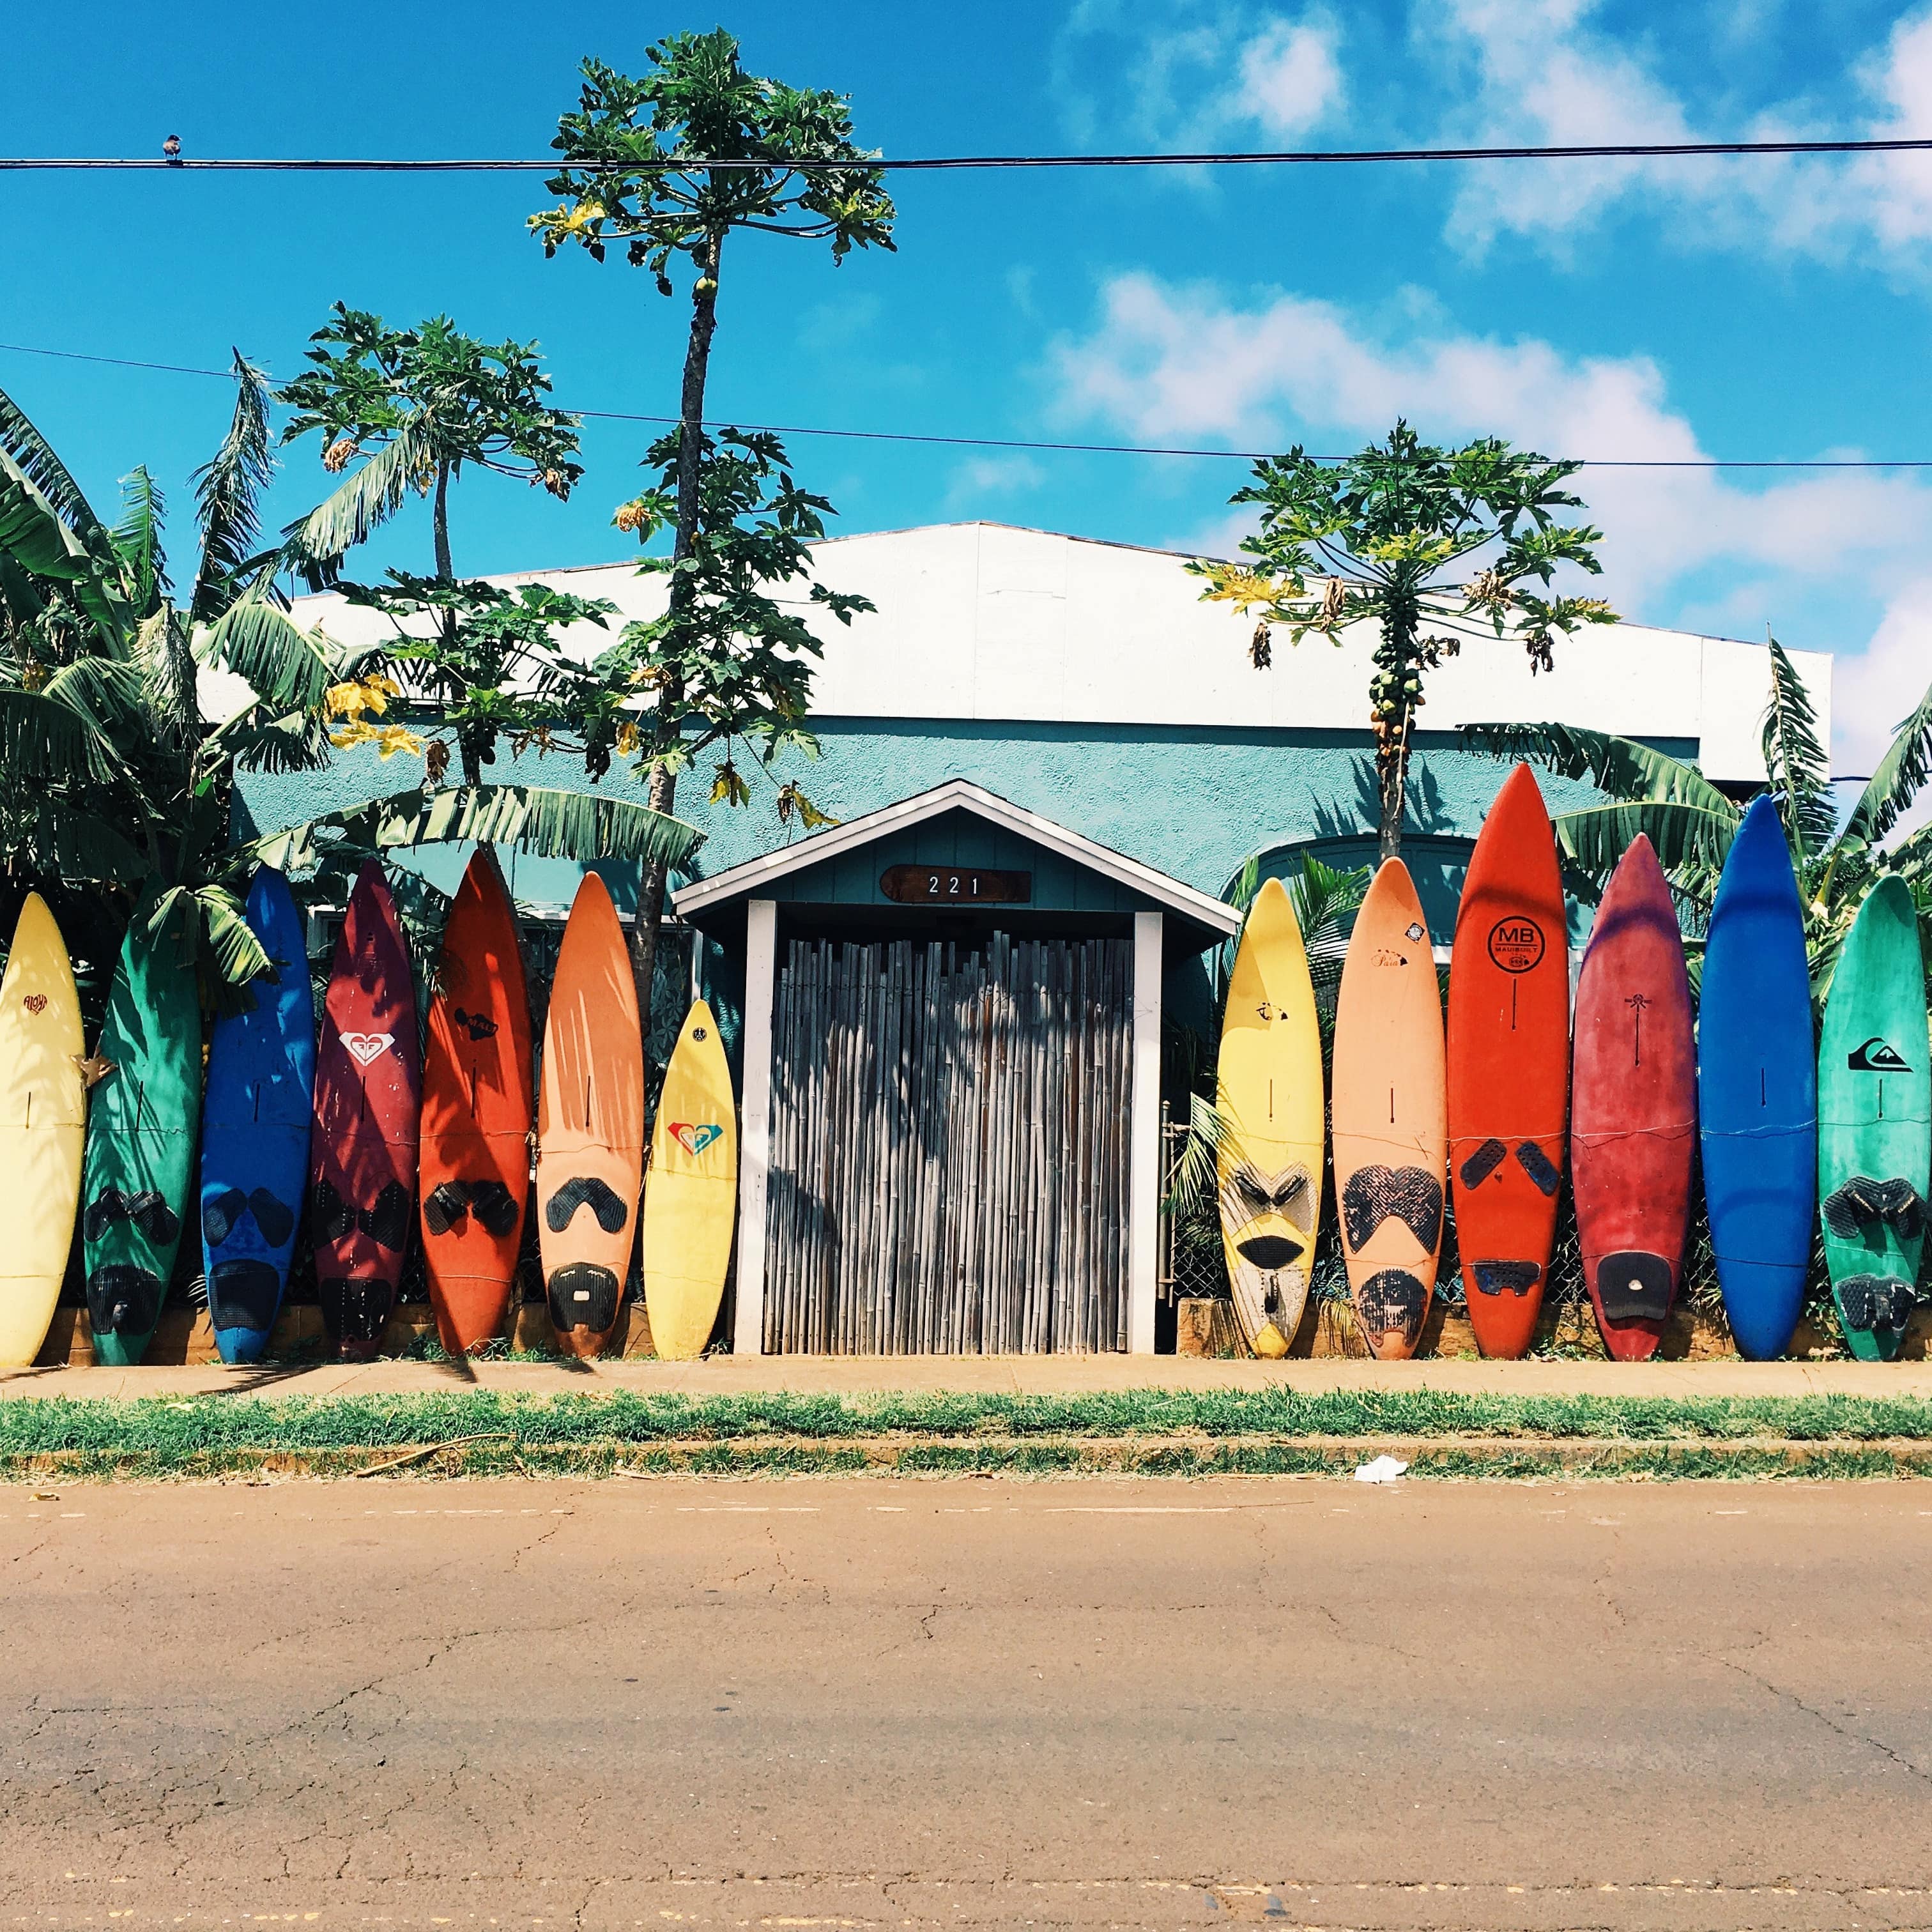 Surfboards lined up in front of a beach hut in Hawaii